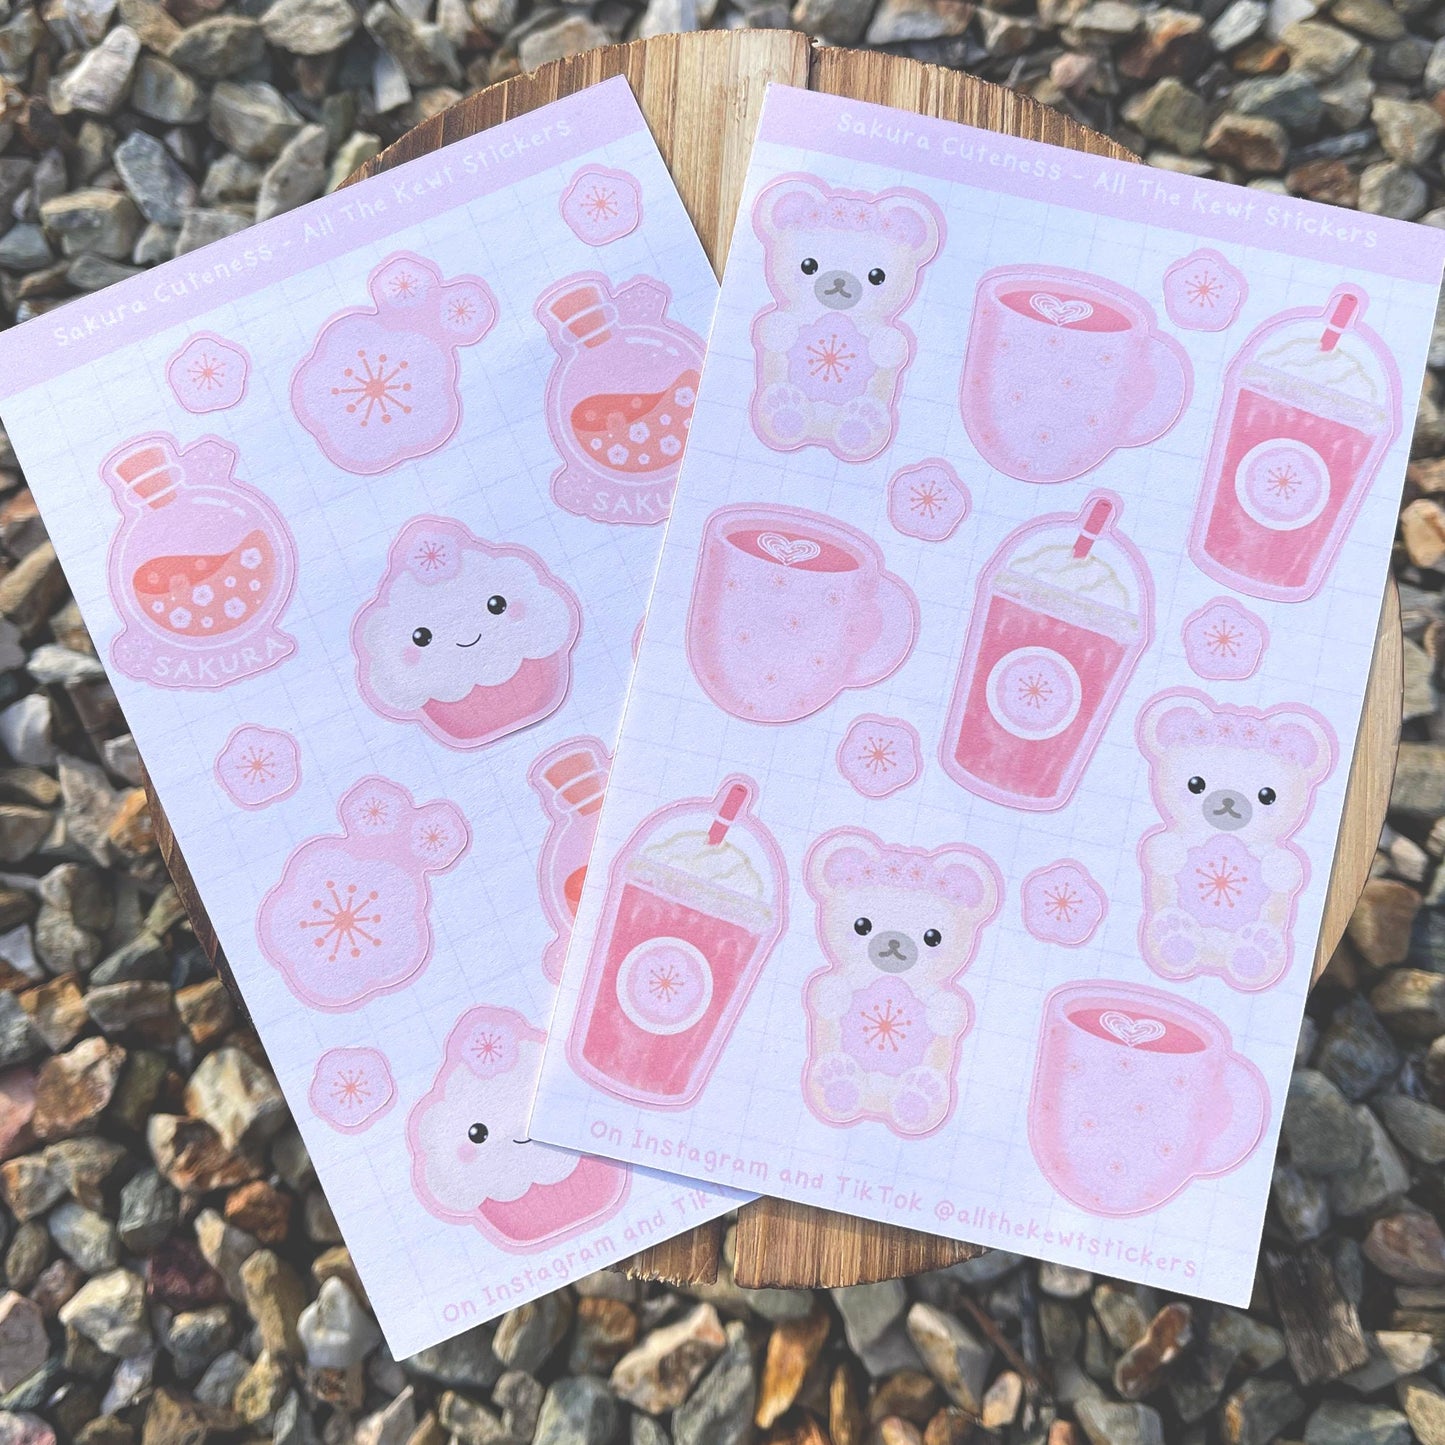 Cherry Blossom Kawaii Sticker Sheets, Cute Bear Stickers, Coffee Stickers, Sakura Cupcakes, Cherry Blossom Holographic or Matte Stickers